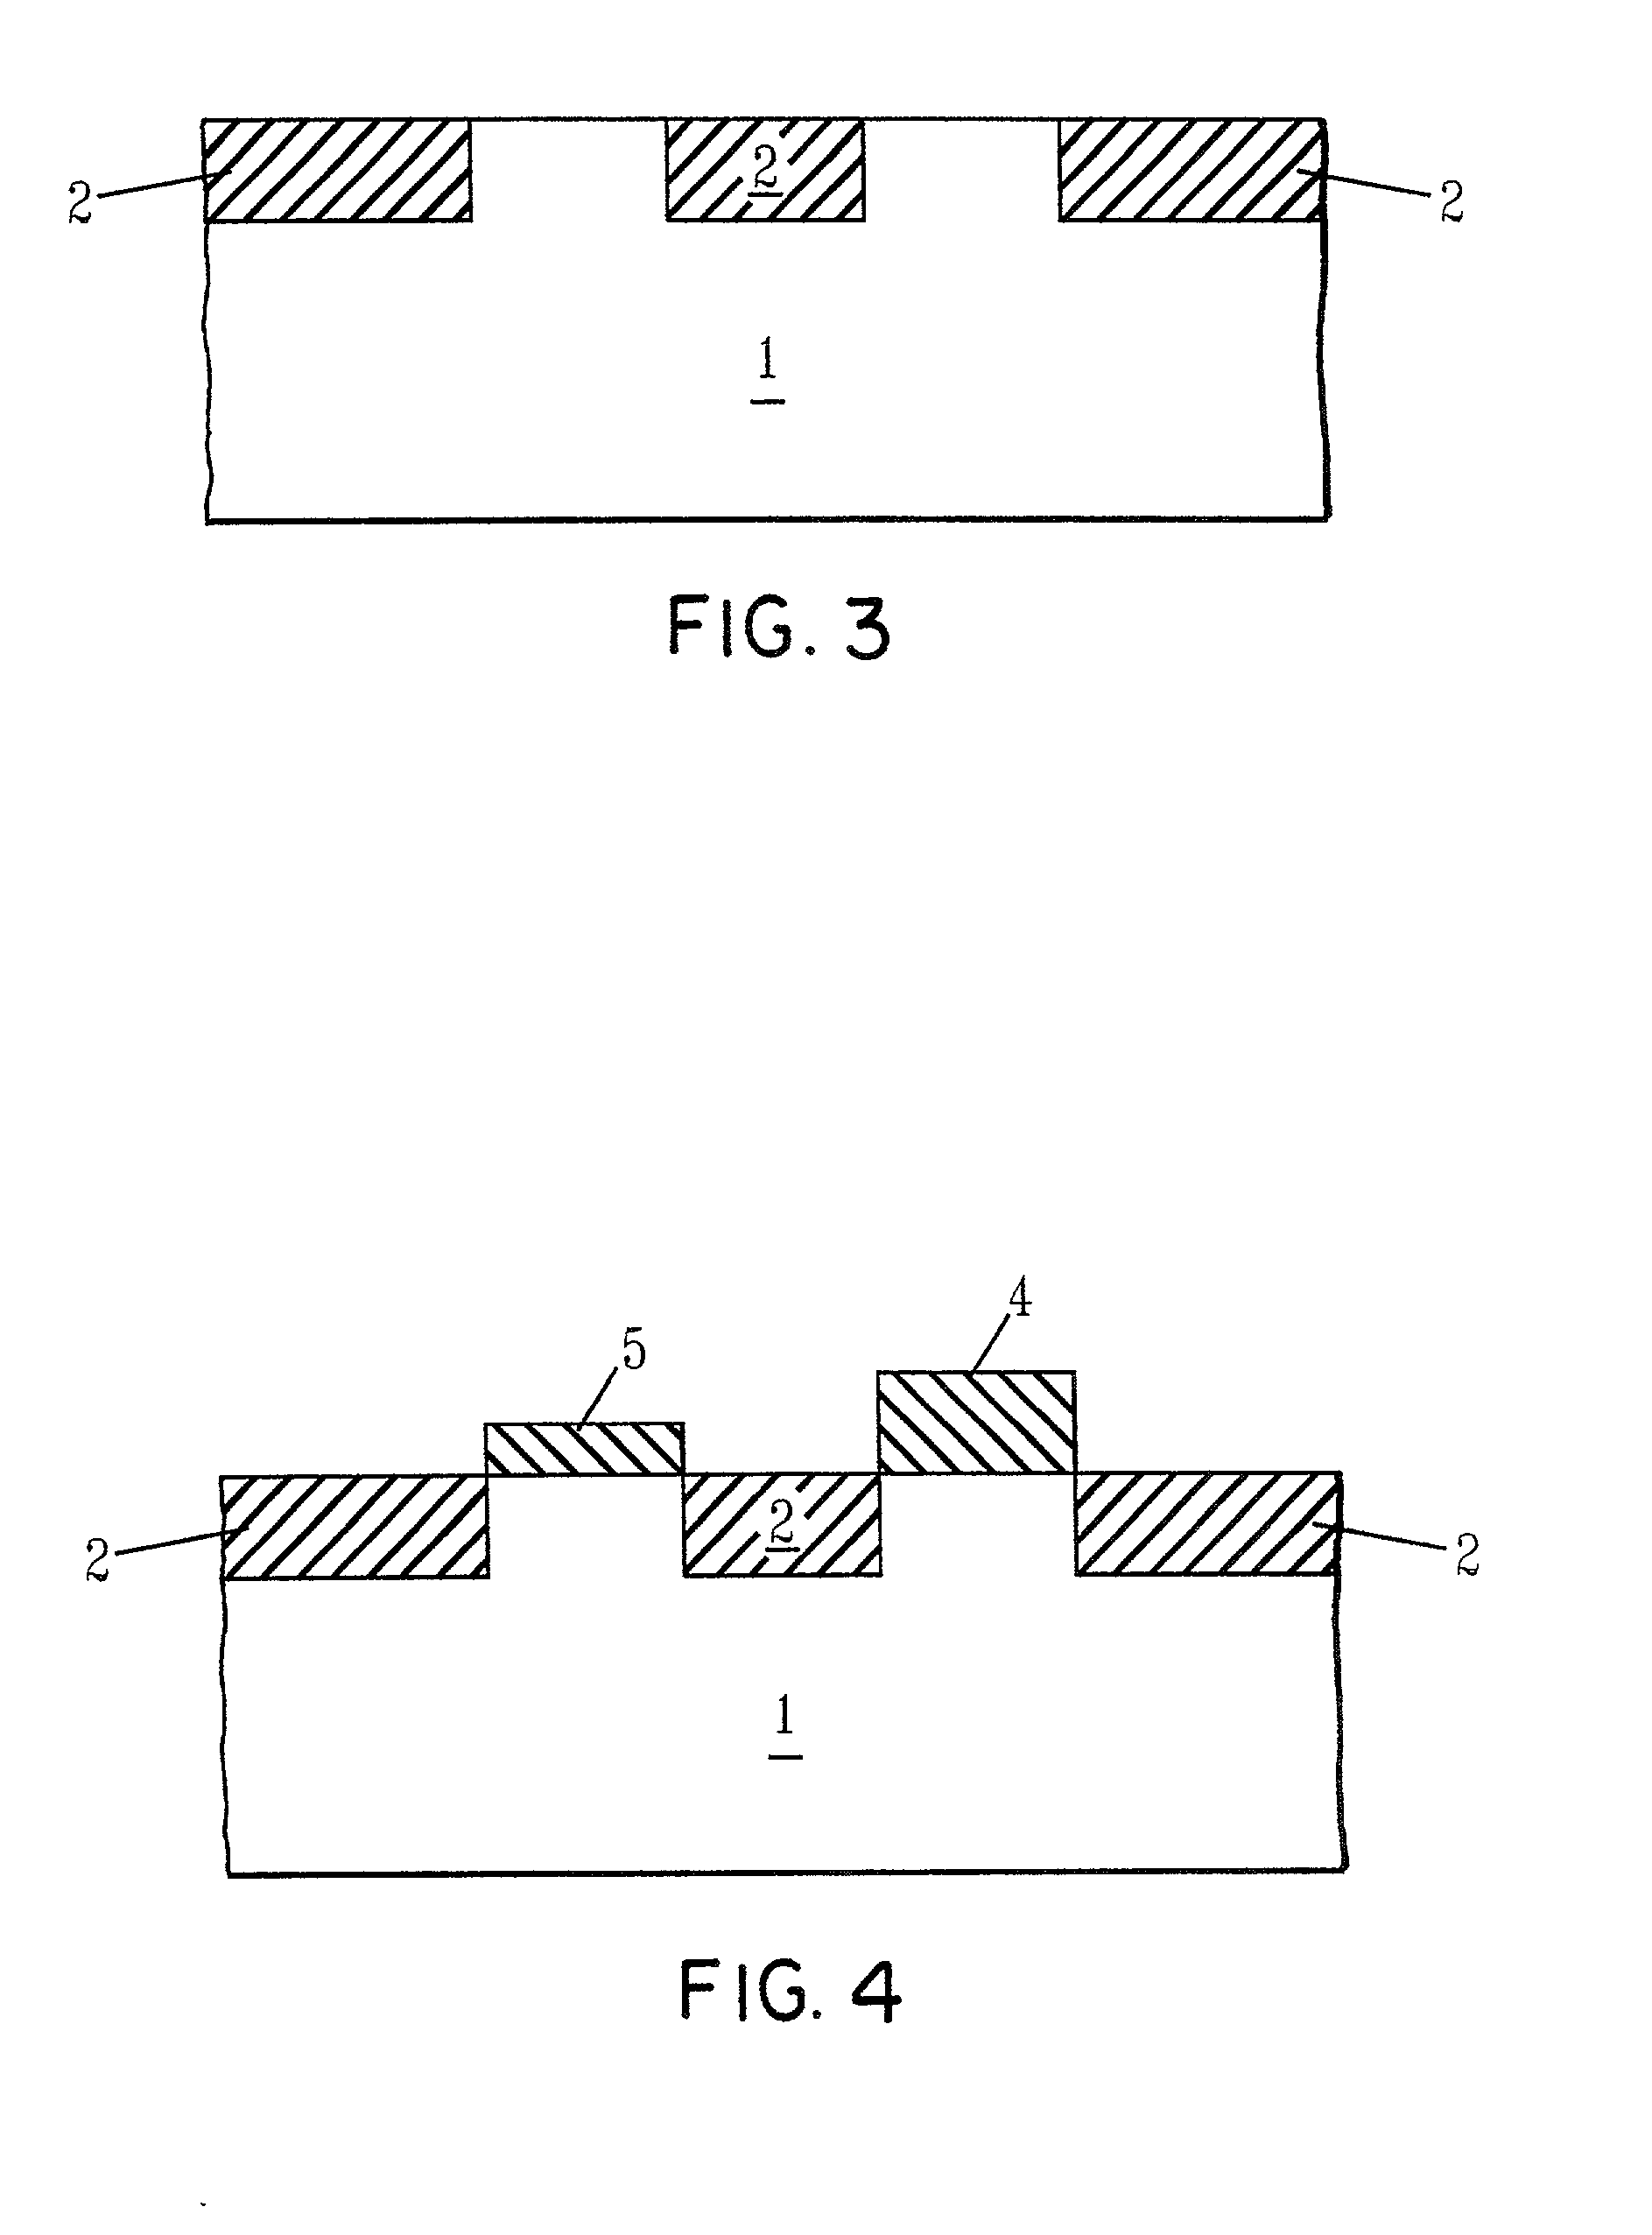 Method for fabricating different gate oxide thickness within the same chip